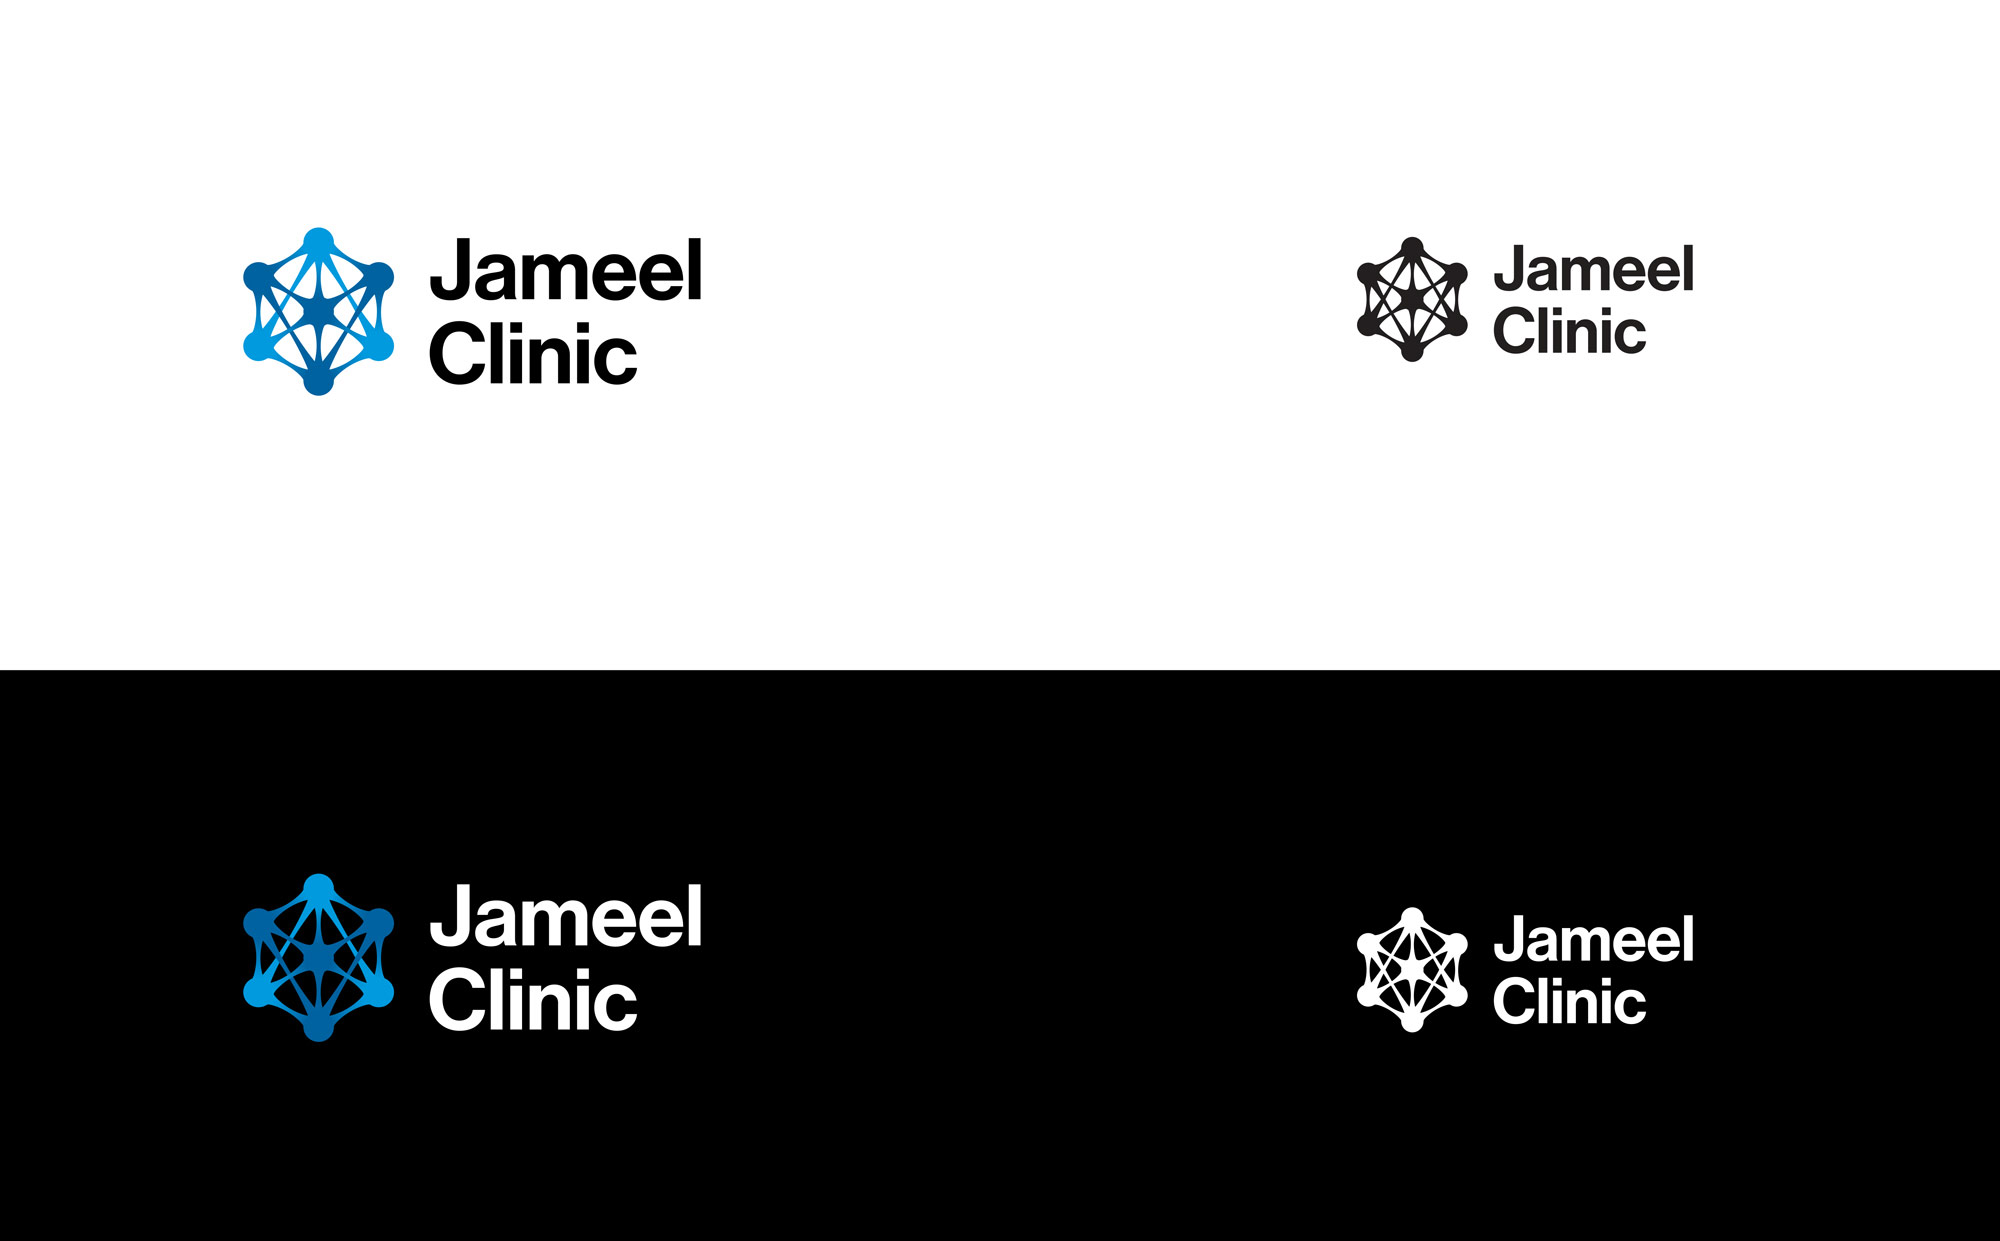 Jameel Clinic logo in color and black and white against light and dark background colors.